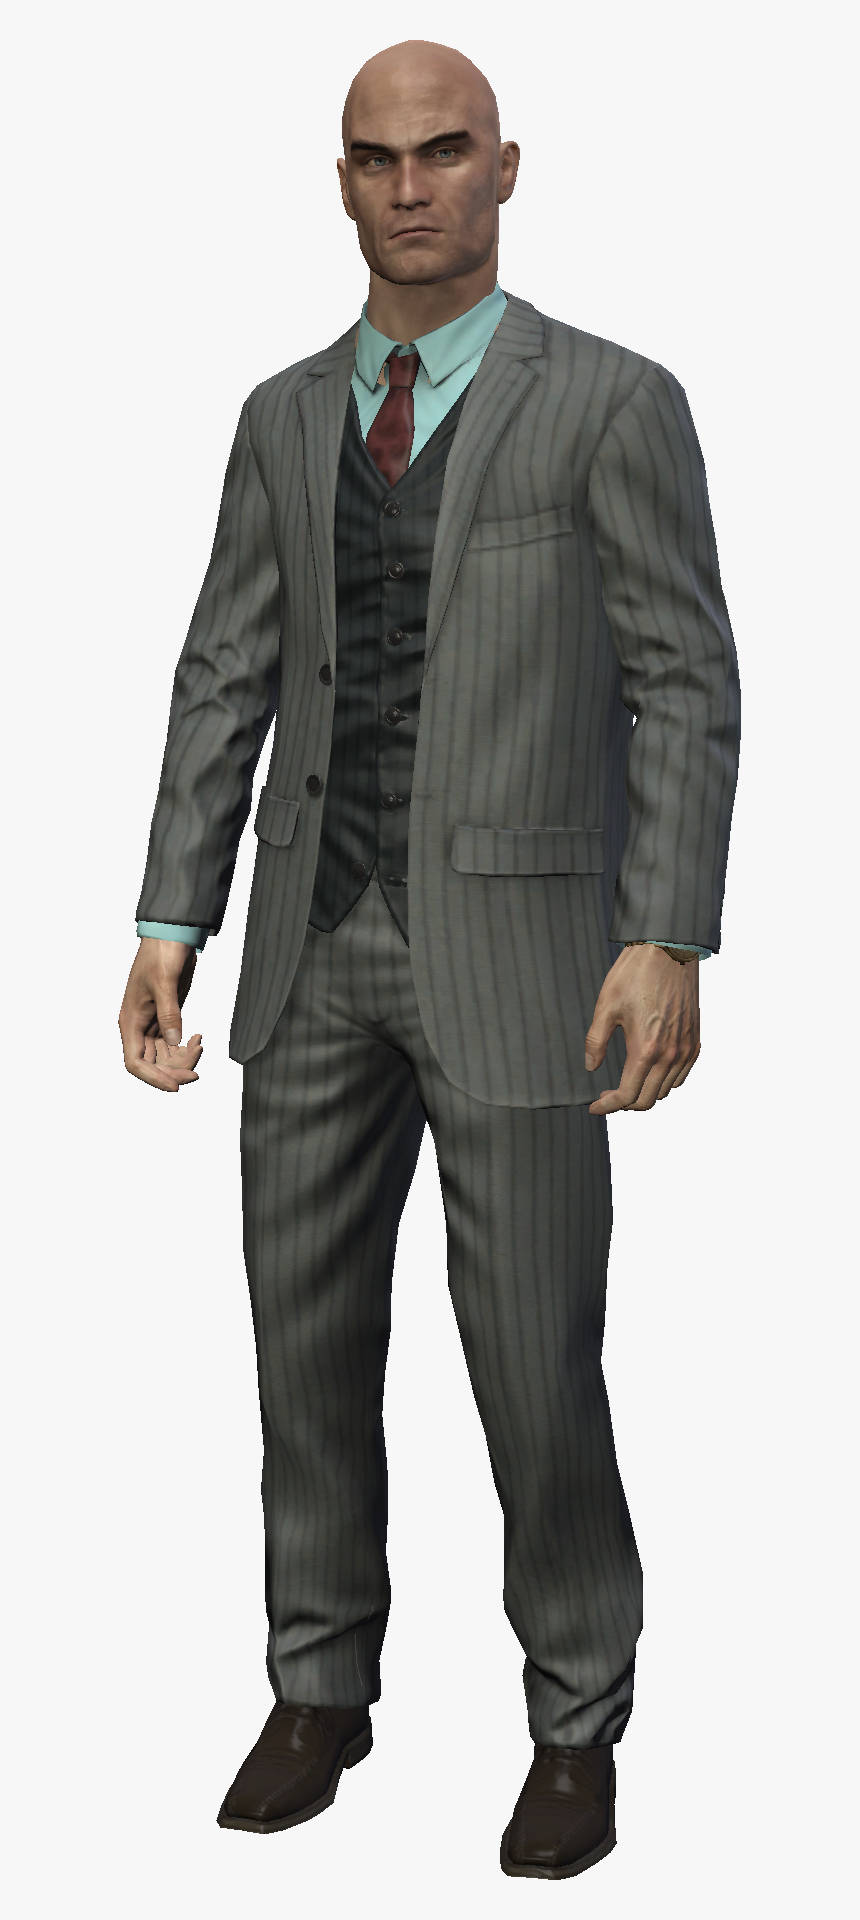 Hitman Absolution Hd Agent 47 Character Background